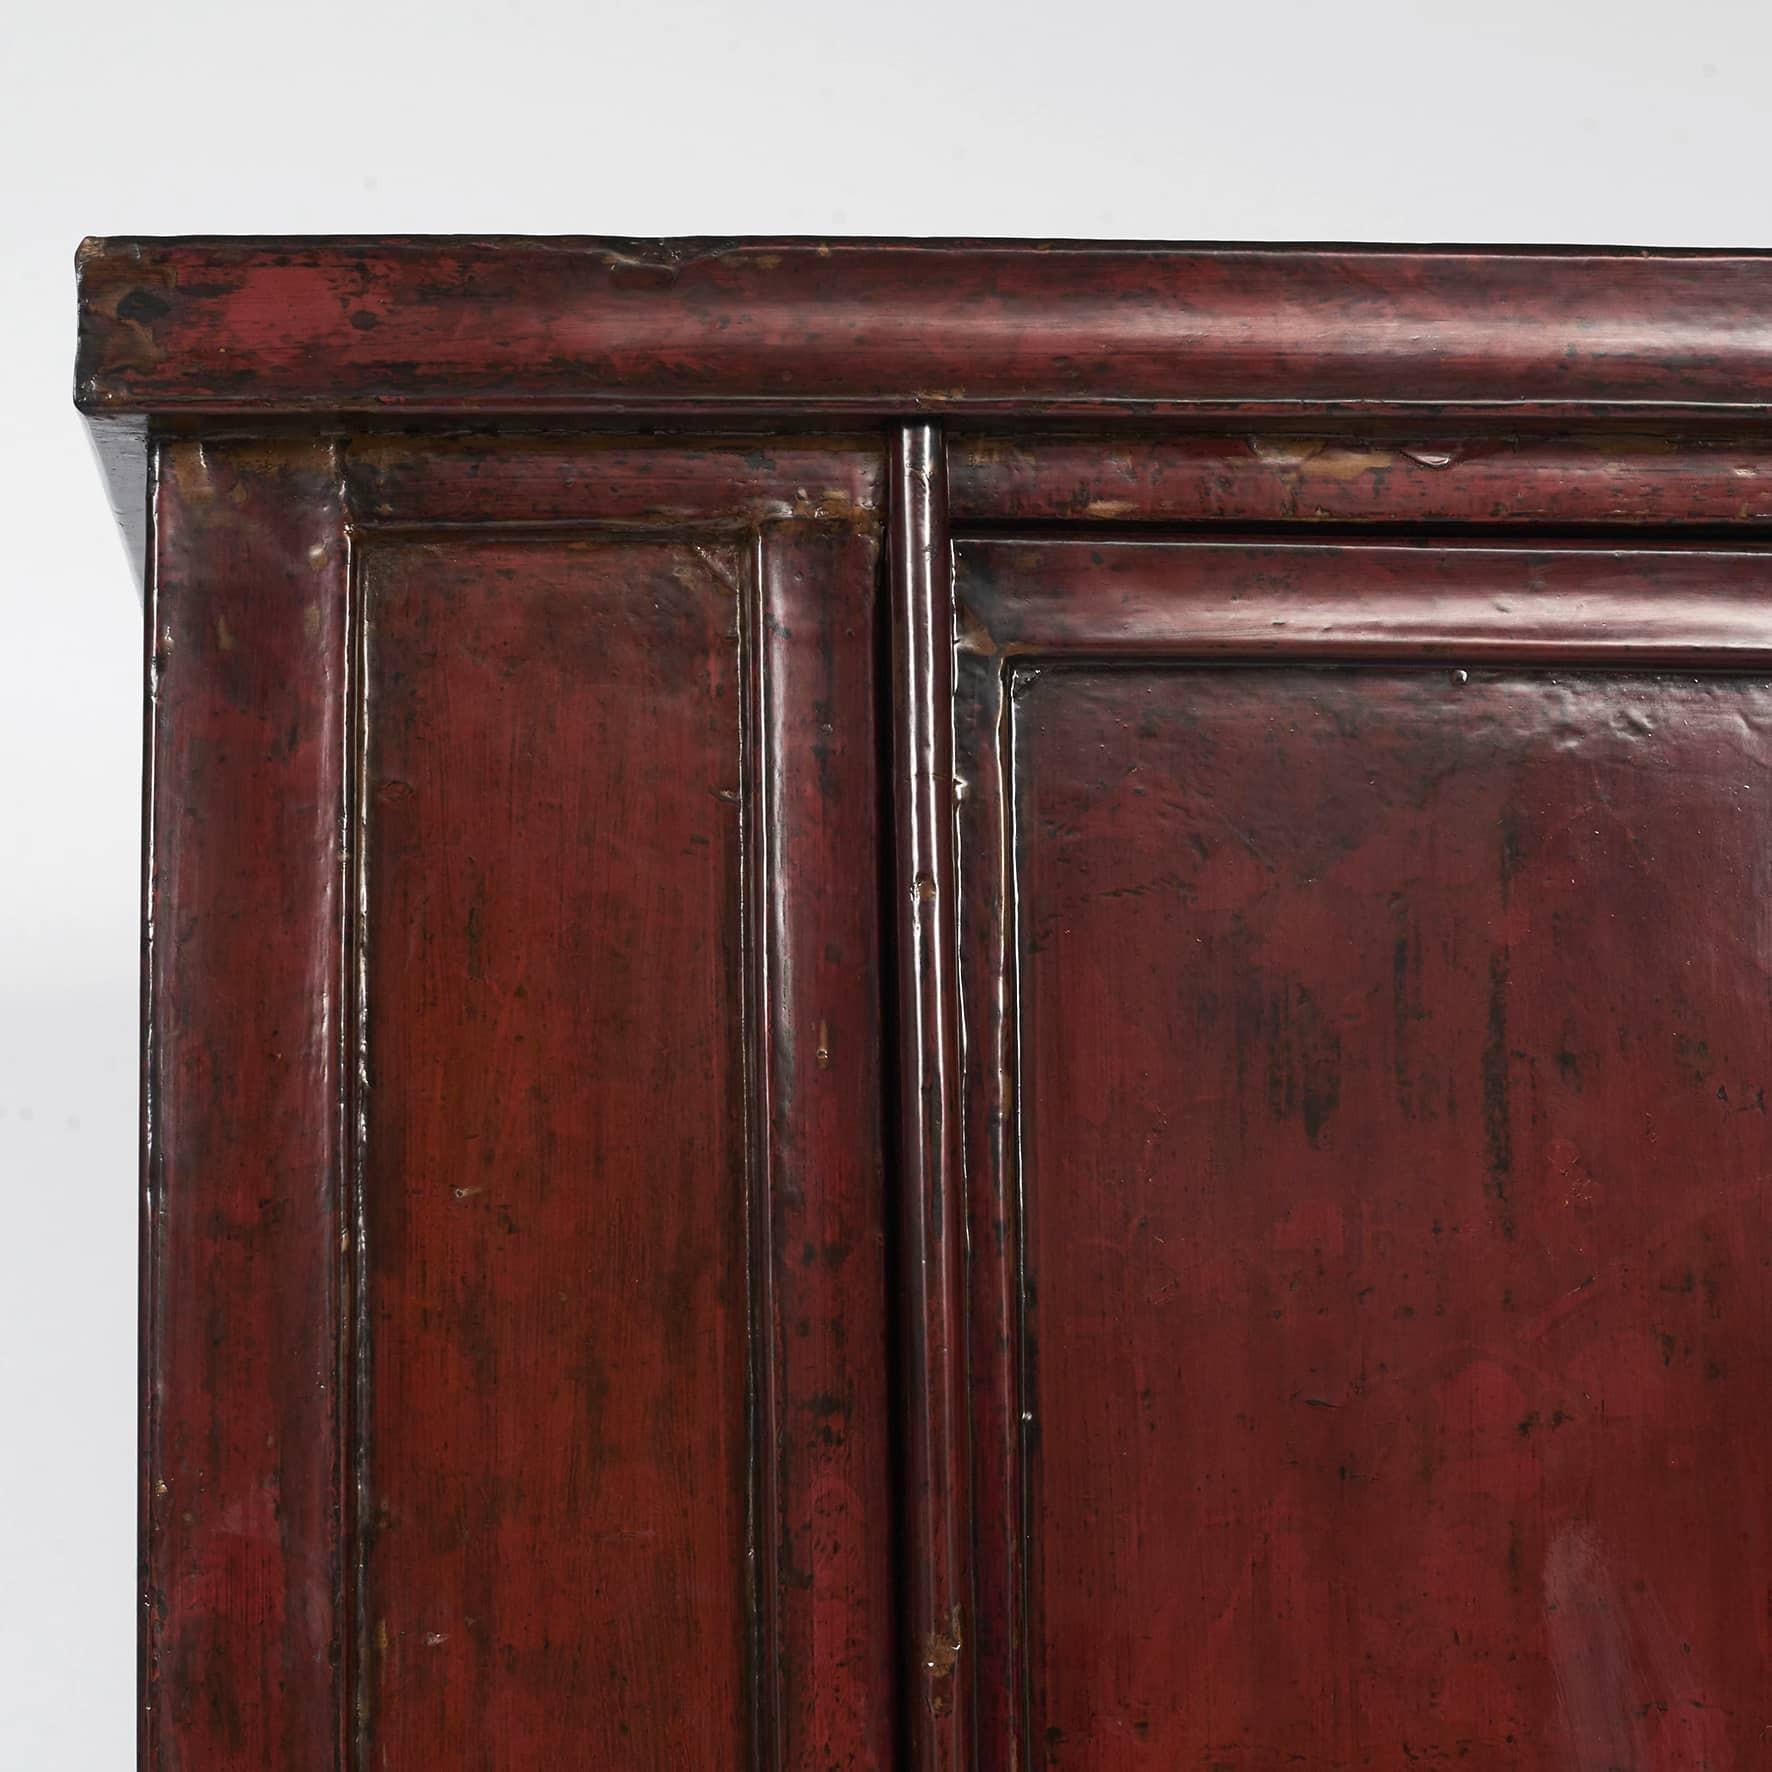 Red Lacquer Cabinet, Shanxi Province 1820-1840 In Good Condition For Sale In Kastrup, DK